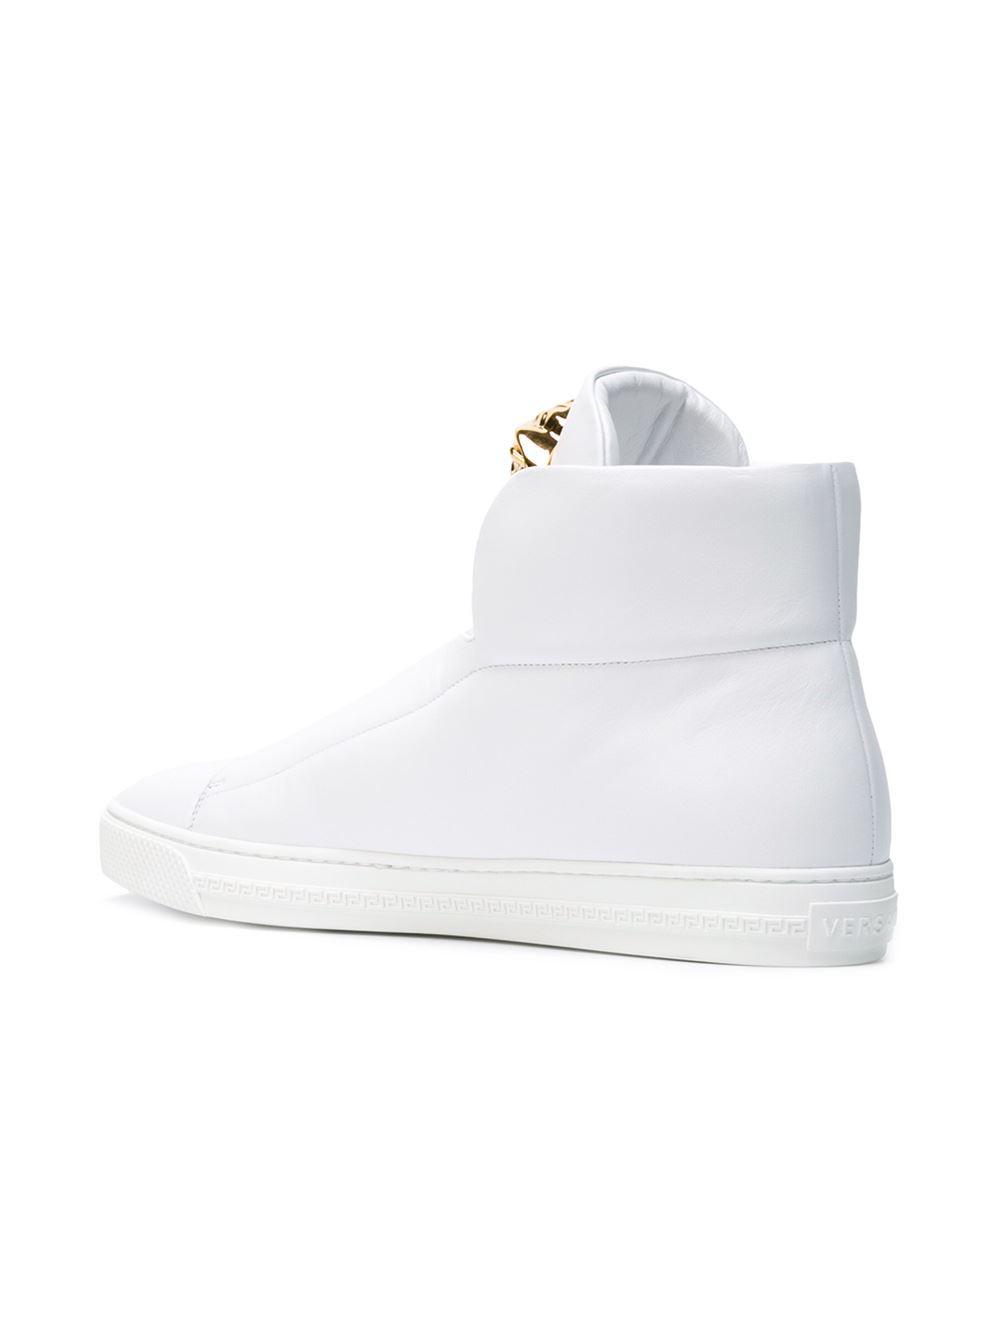 Versace Leather Medusa Hi-top Sneakers in White for Men - Lyst